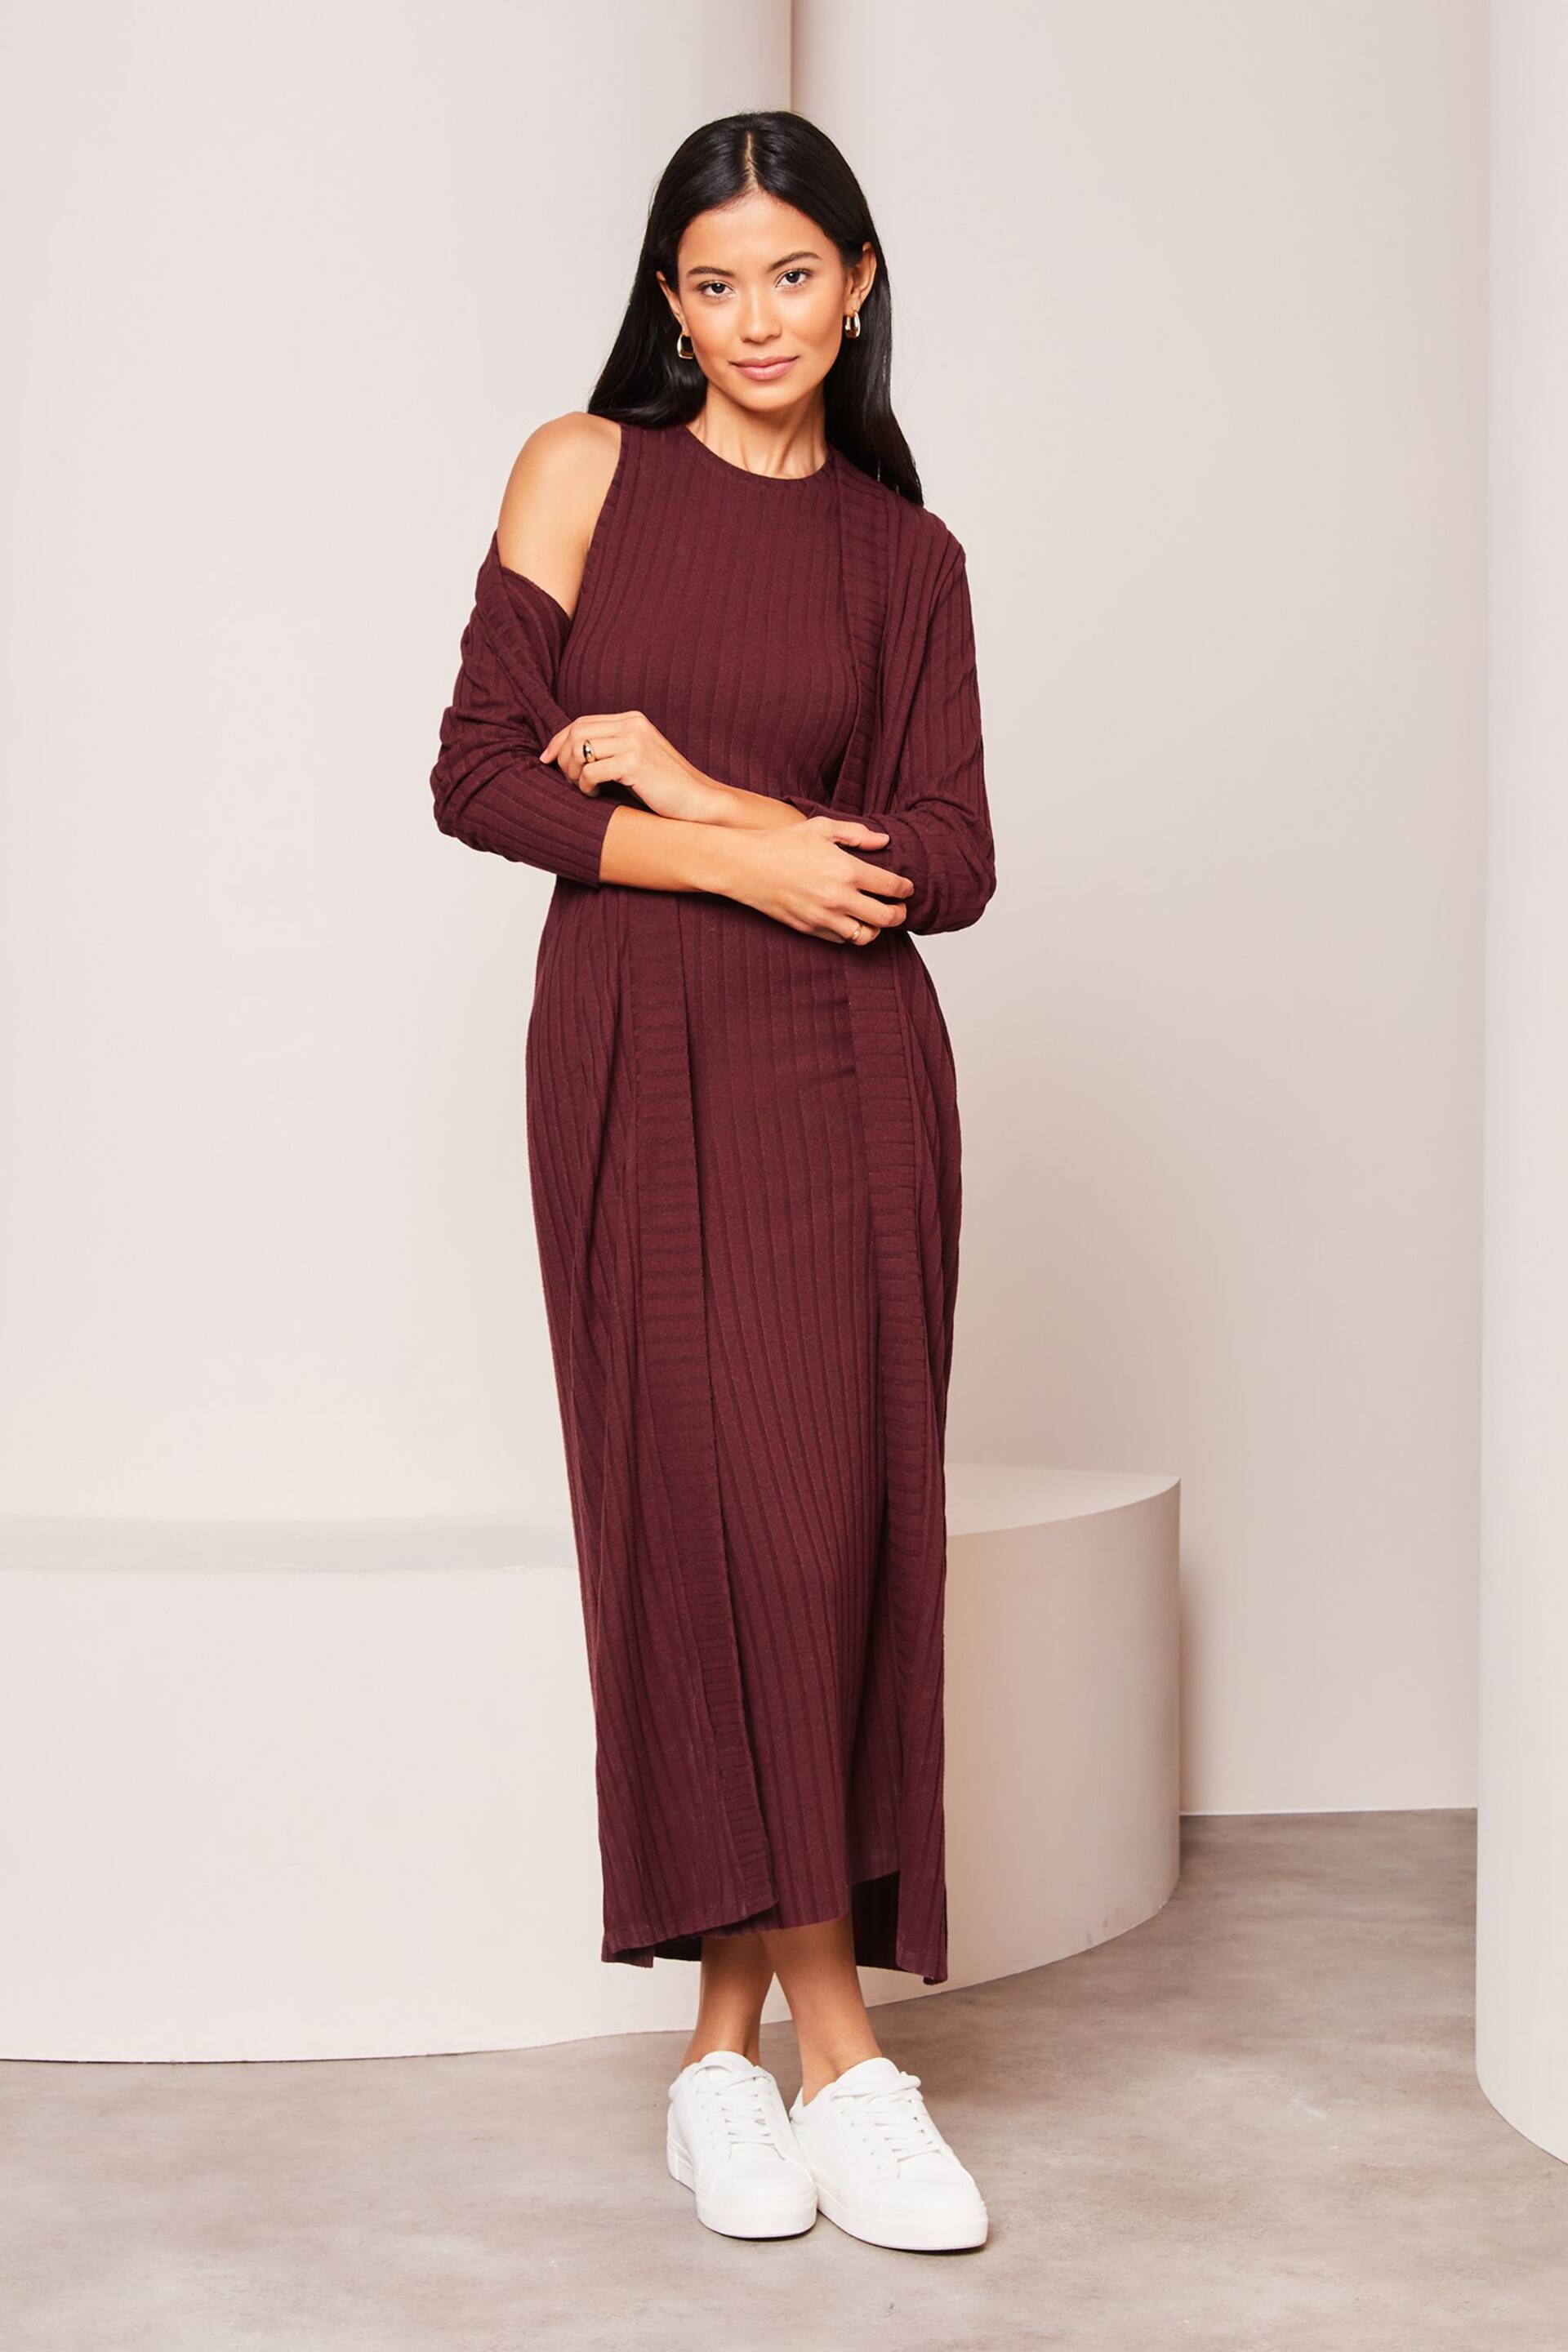 Lipsy Burgundy Red Red Long Sleeve Ribbed Cosy Longline Cardigan - Image 3 of 4